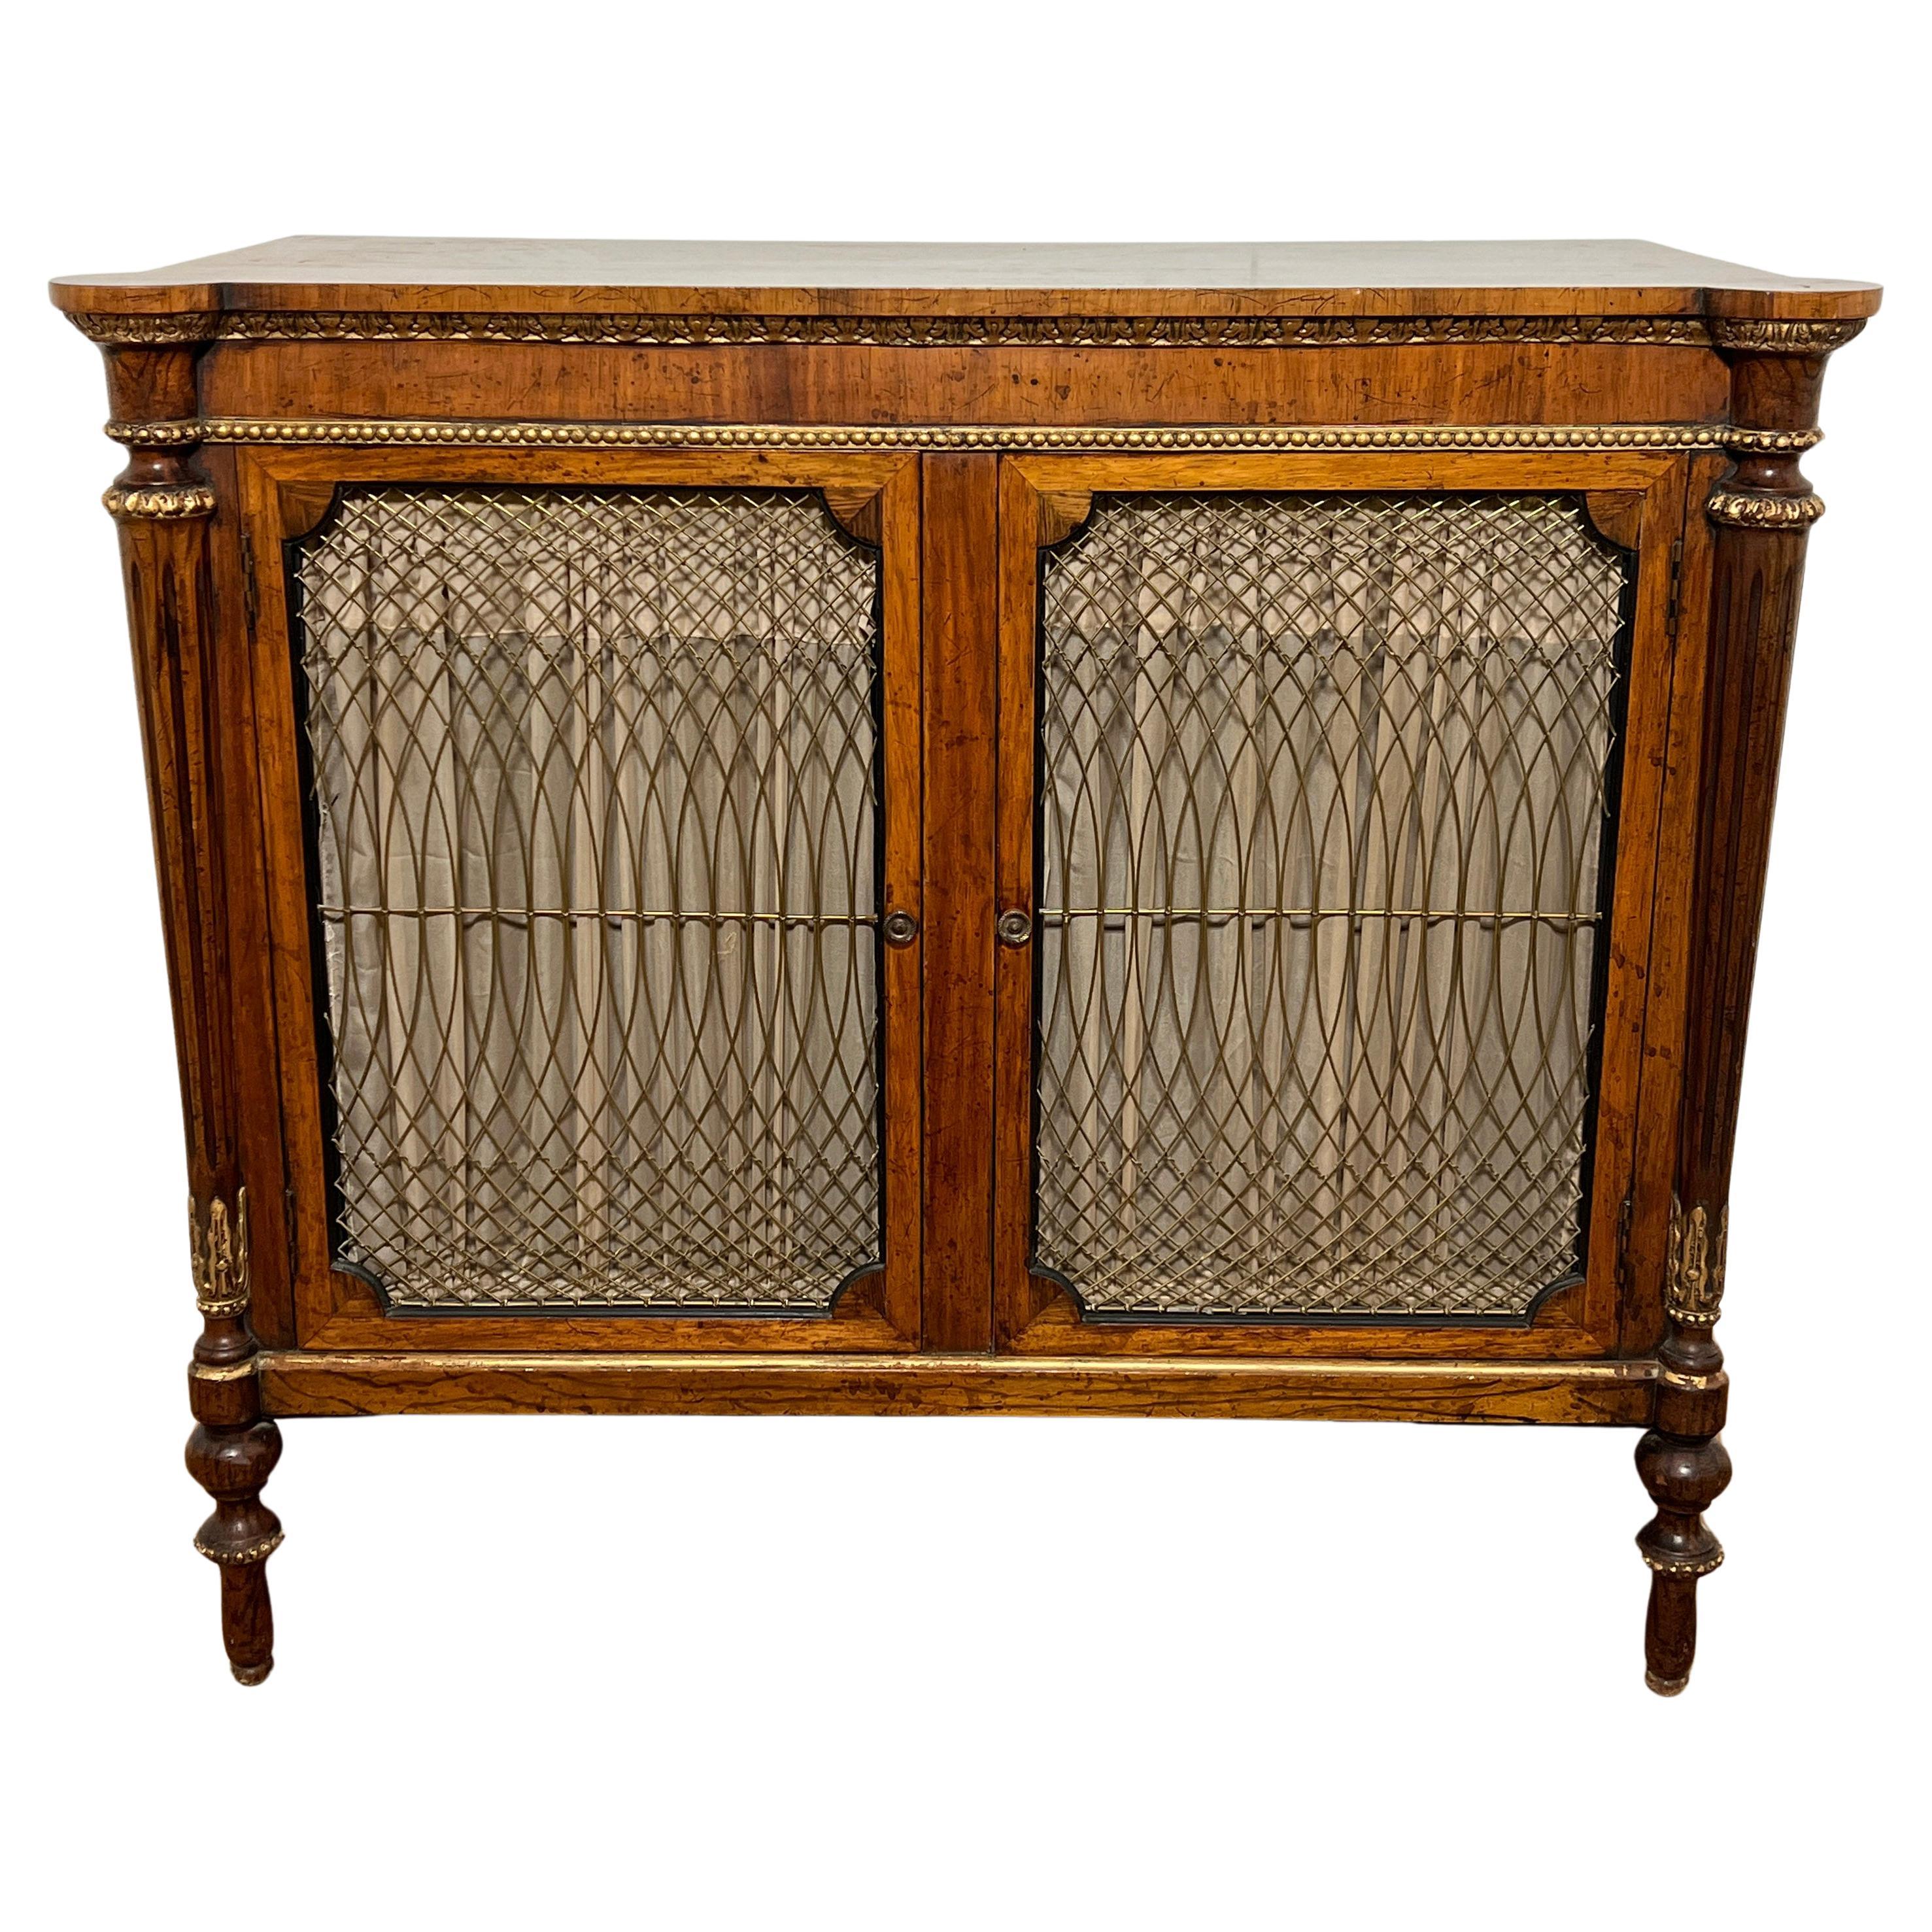 Early 19th Century English Regency Grill Front Rosewood Credenza